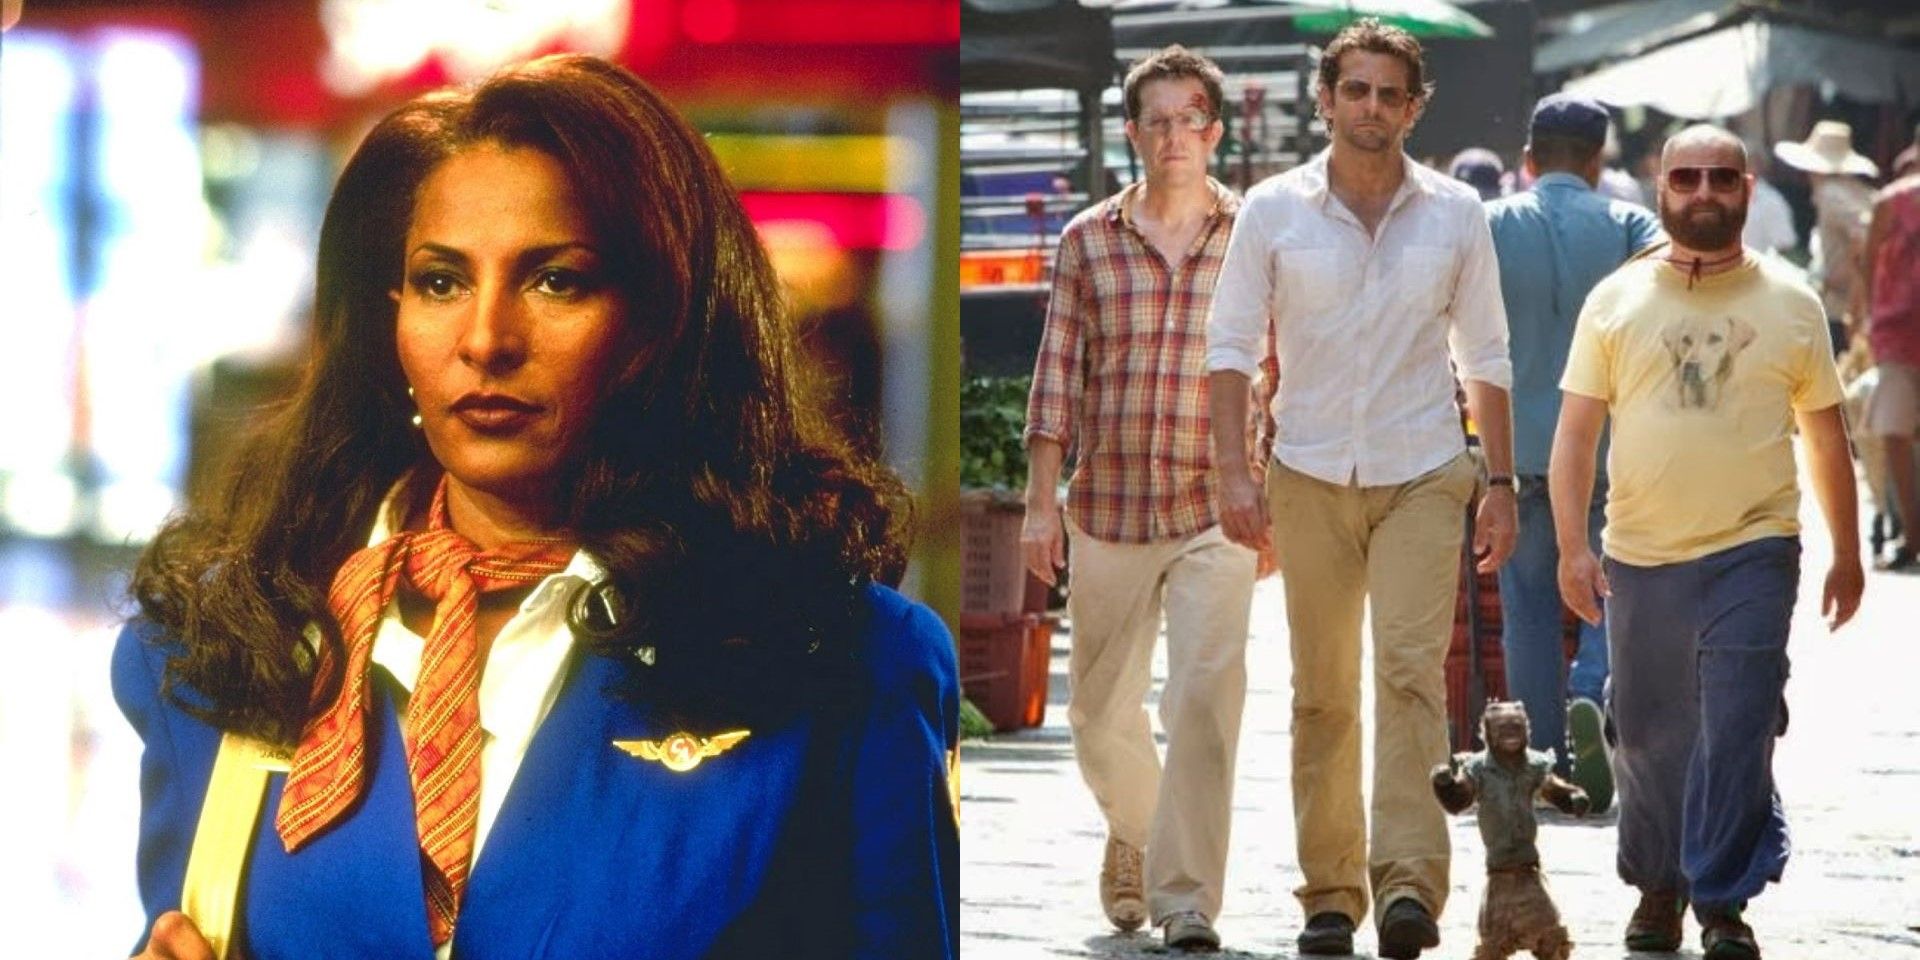 Two images featuring scenes from Jackie Brown & The Hangover